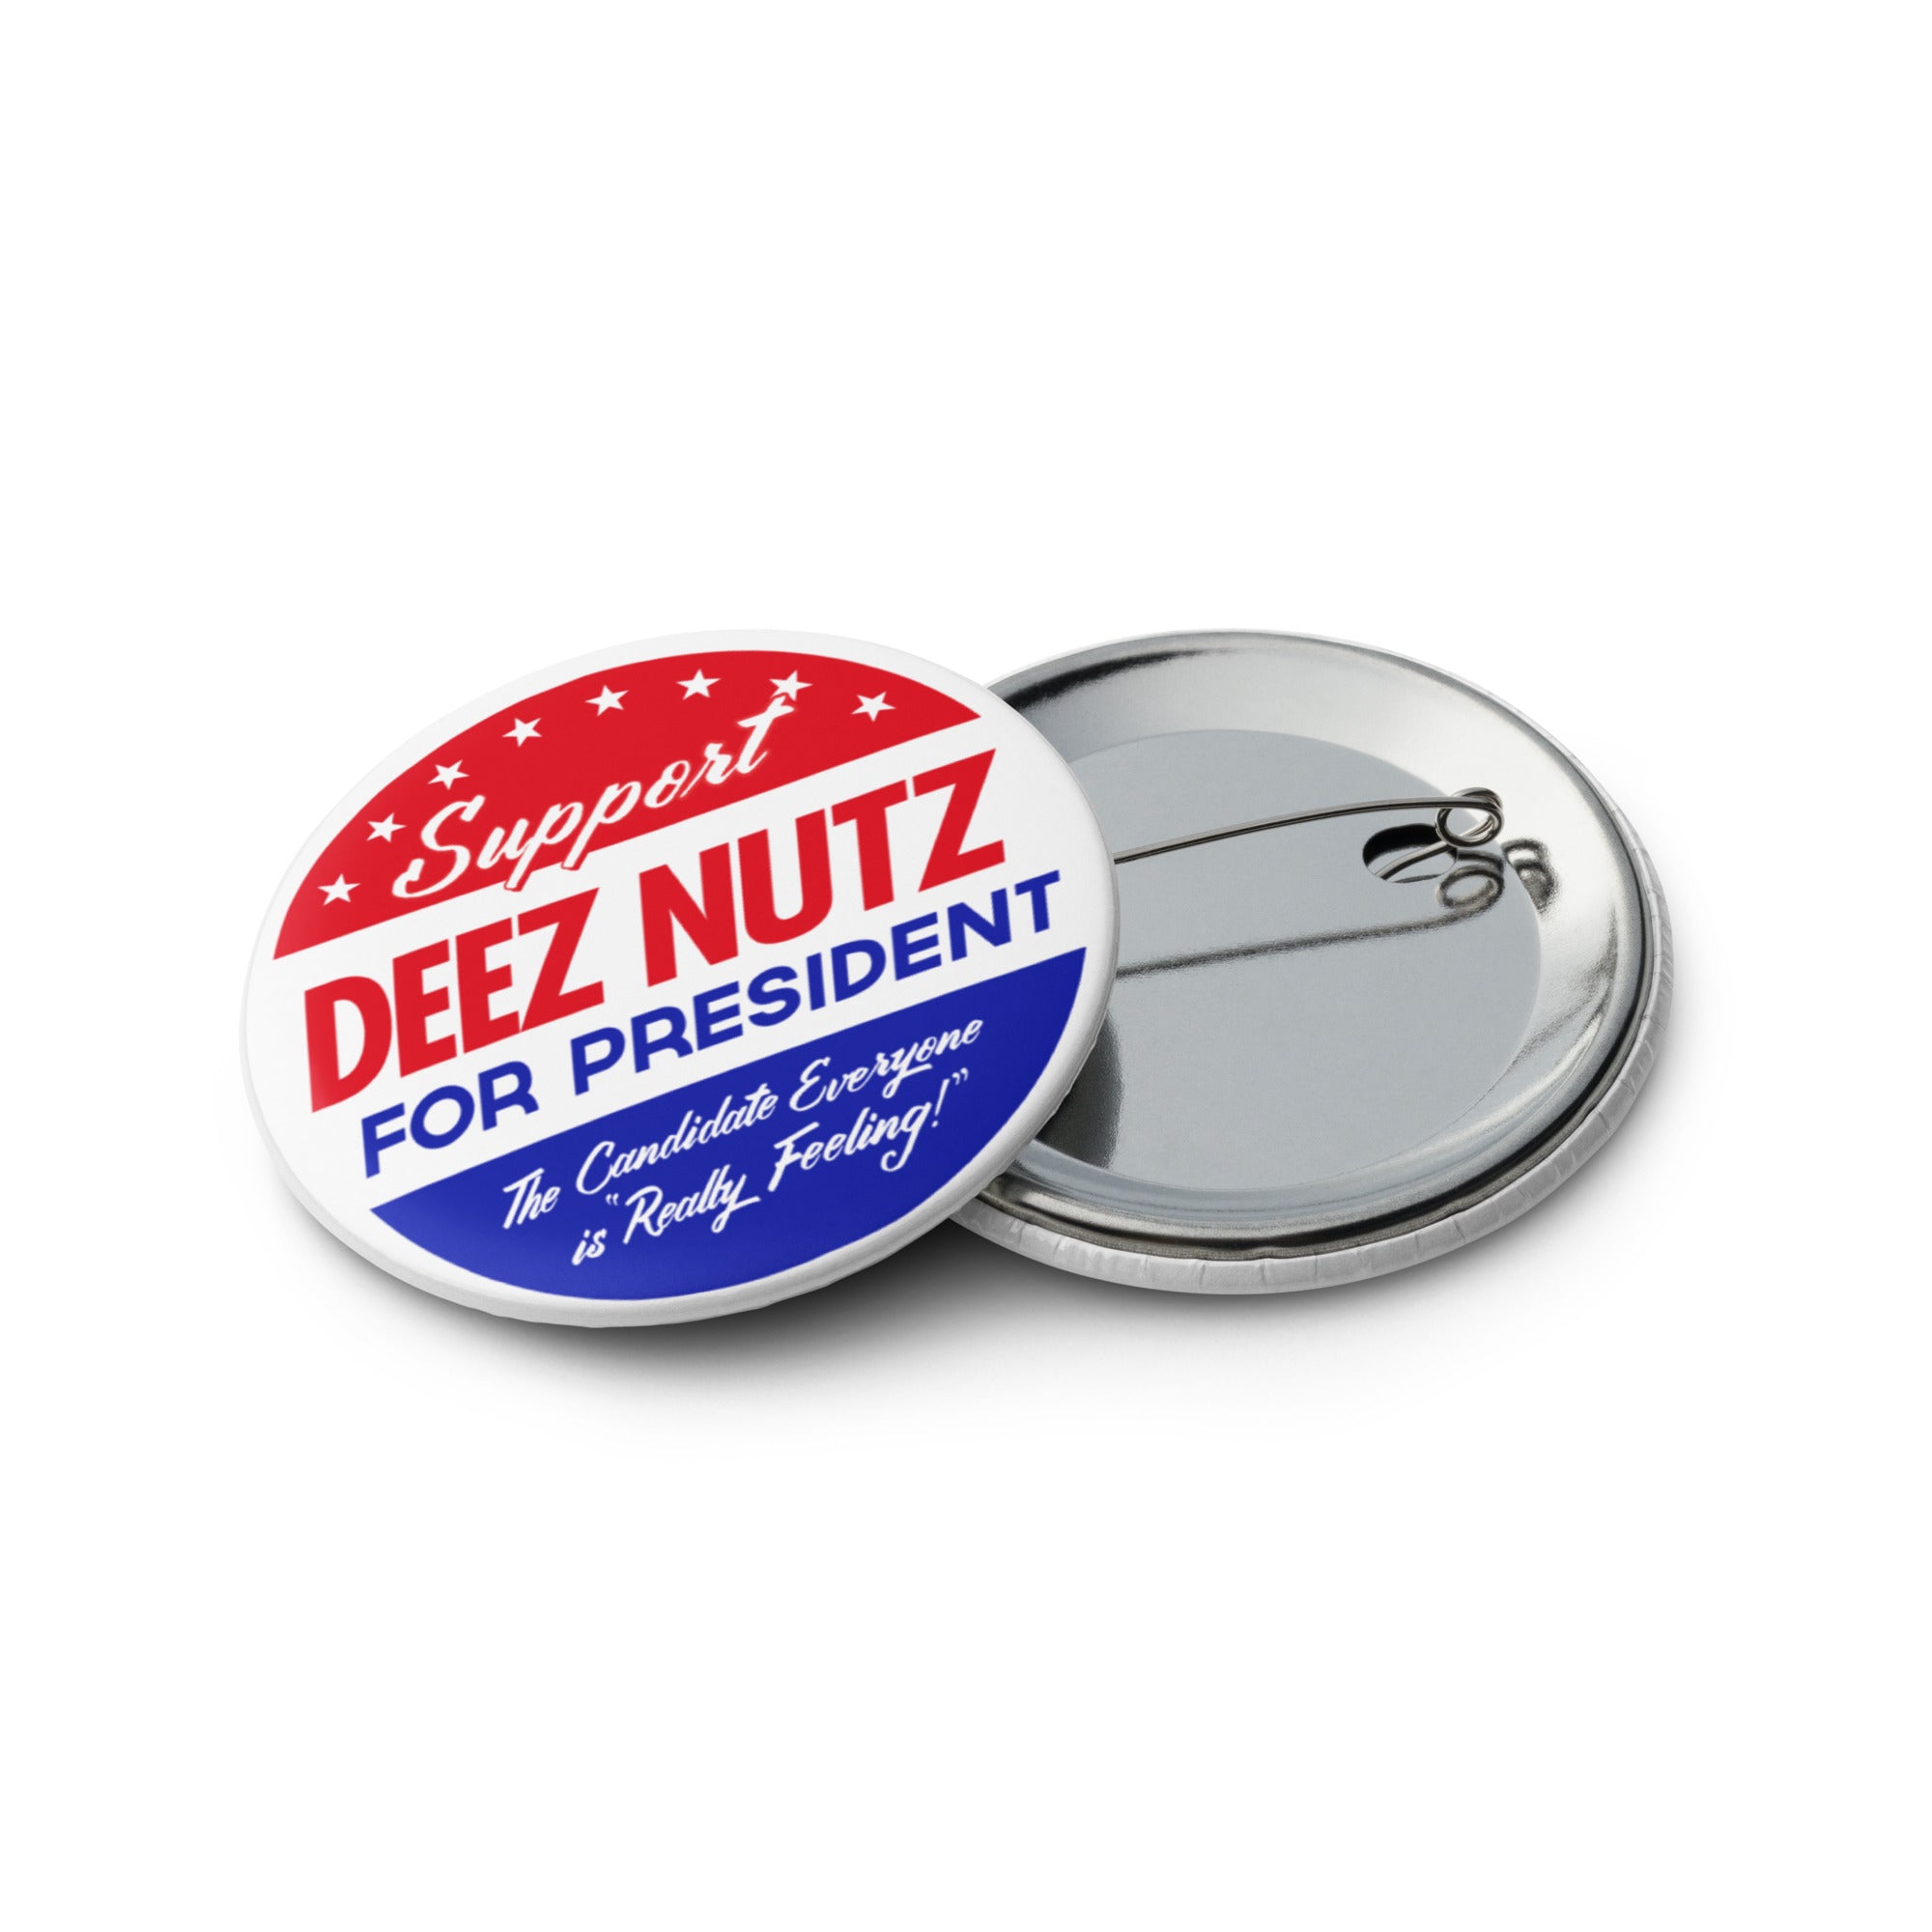 Deez Nuts for President Button Set